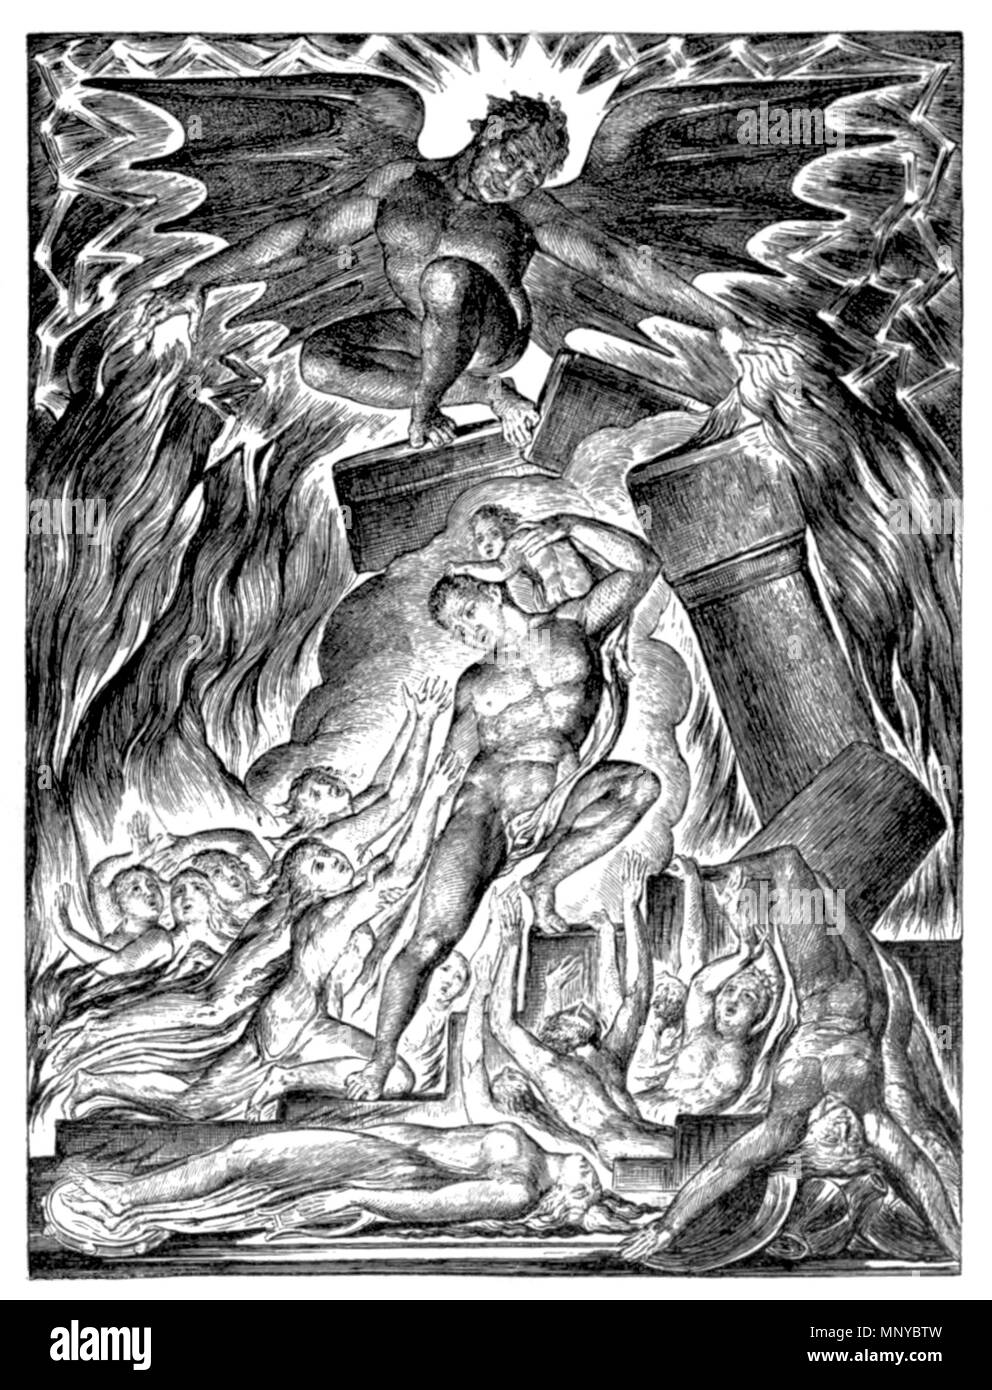 . An illustration extracted from page 67 of William Blake, painter and poet by Richard Garnett Publisher: London, Seeley. The work is captioned as The Destruction of Job's Sons and Daughters. From the 'Book of Job.' By W. Blake . published 1895.   William Blake  (1757–1827)       Alternative names W. Blake; Uil'iam Bleik  Description British painter, poet,, writer, theologian, collector and engraver  Date of birth/death 28 November 1757 12 August 1827  Location of birth/death Broadwick Street Charing Cross  Work location London  Authority control  : Q41513 VIAF: 54144439 ISNI: 0000 0001 2096 1 Stock Photo